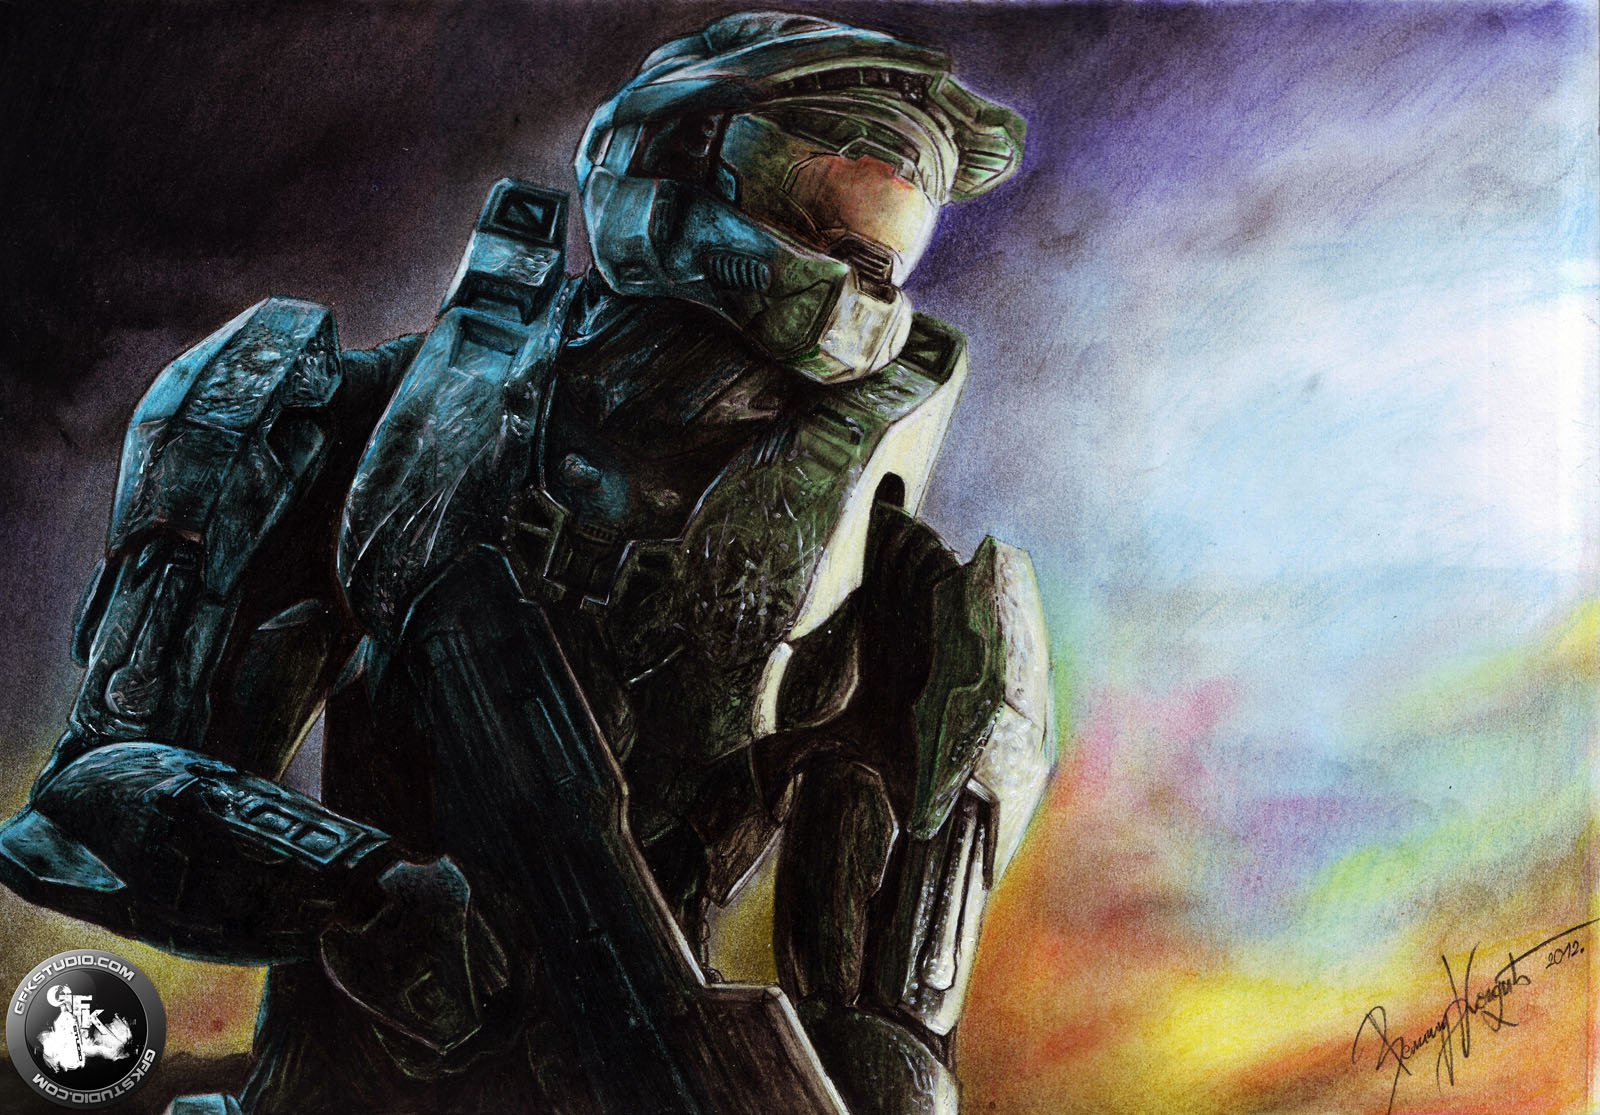 The Master Chief finally arrived on Game Art HQ! 